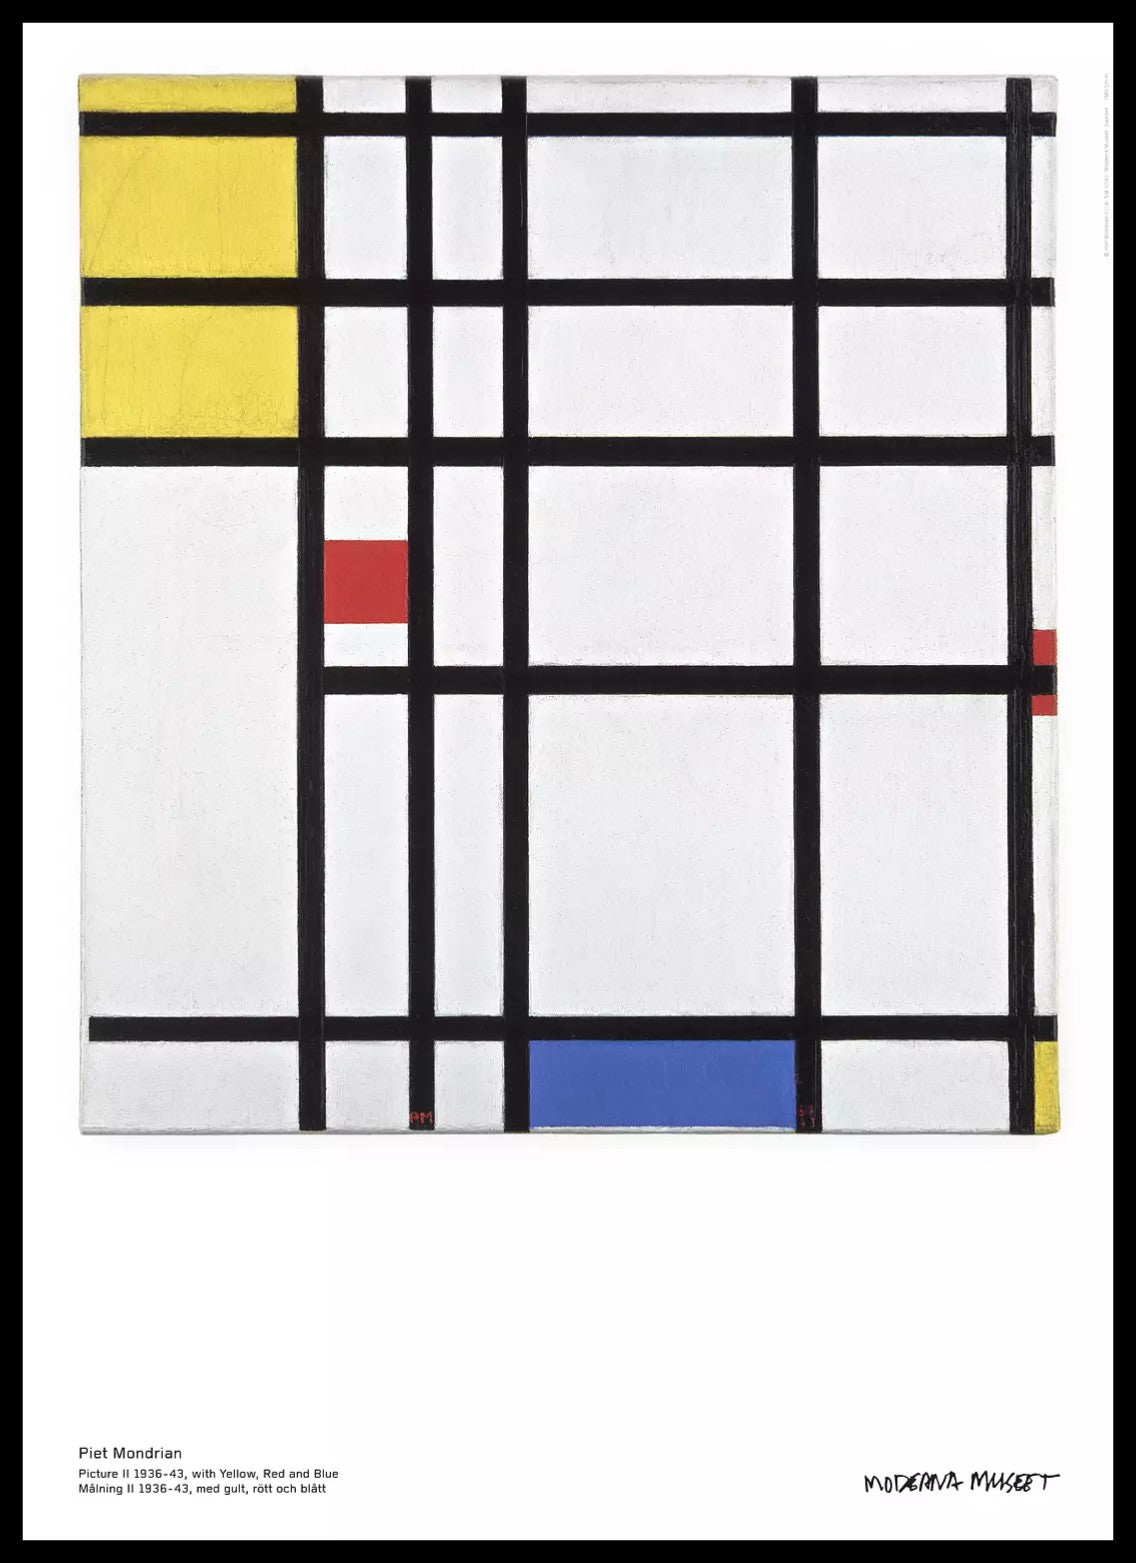 Piet Mondrian / Picture II 1932-43 with yellow, red and blue